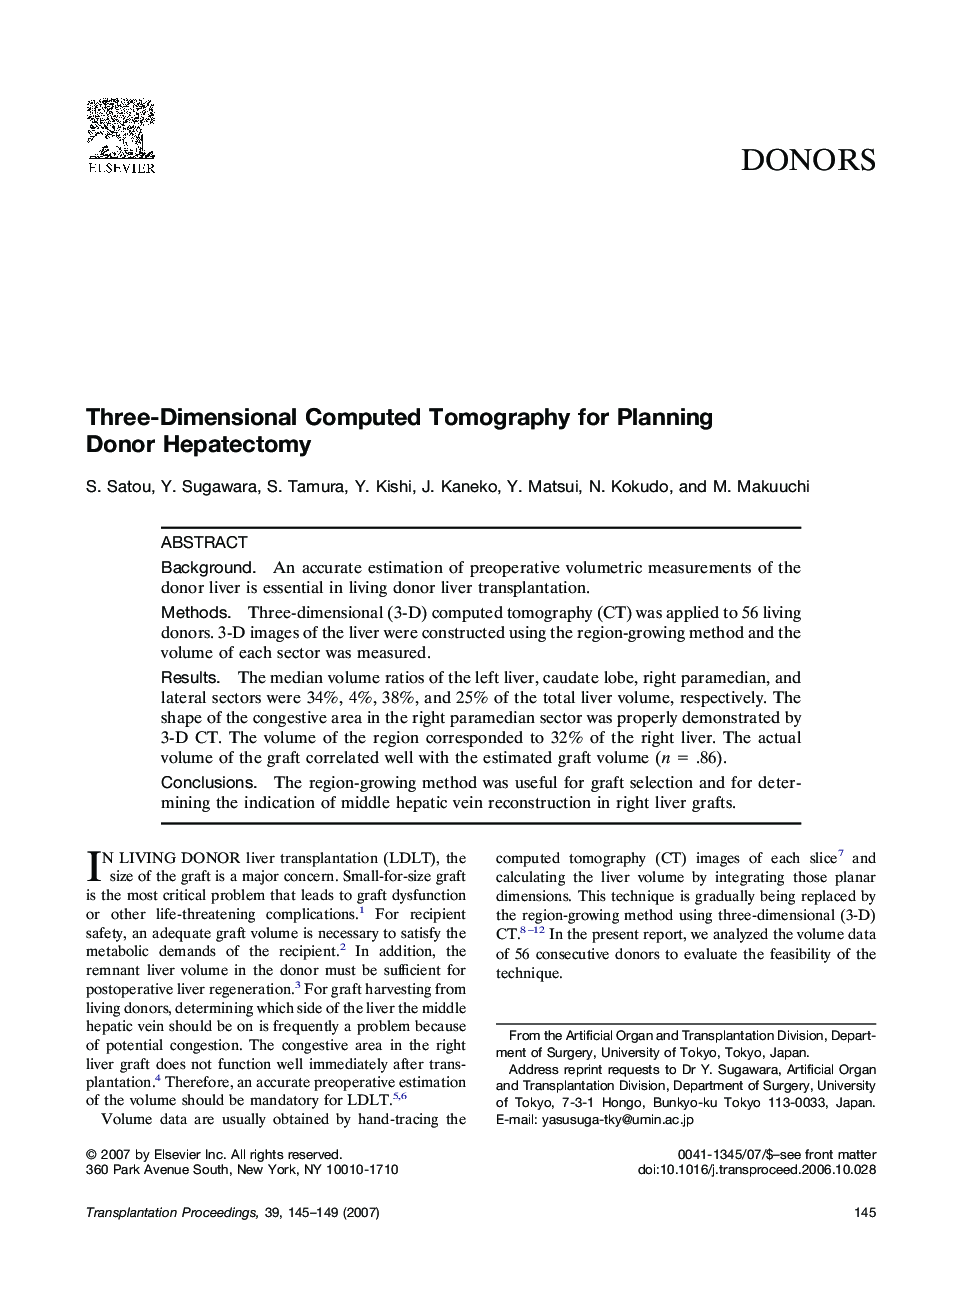 Three-Dimensional Computed Tomography for Planning Donor Hepatectomy